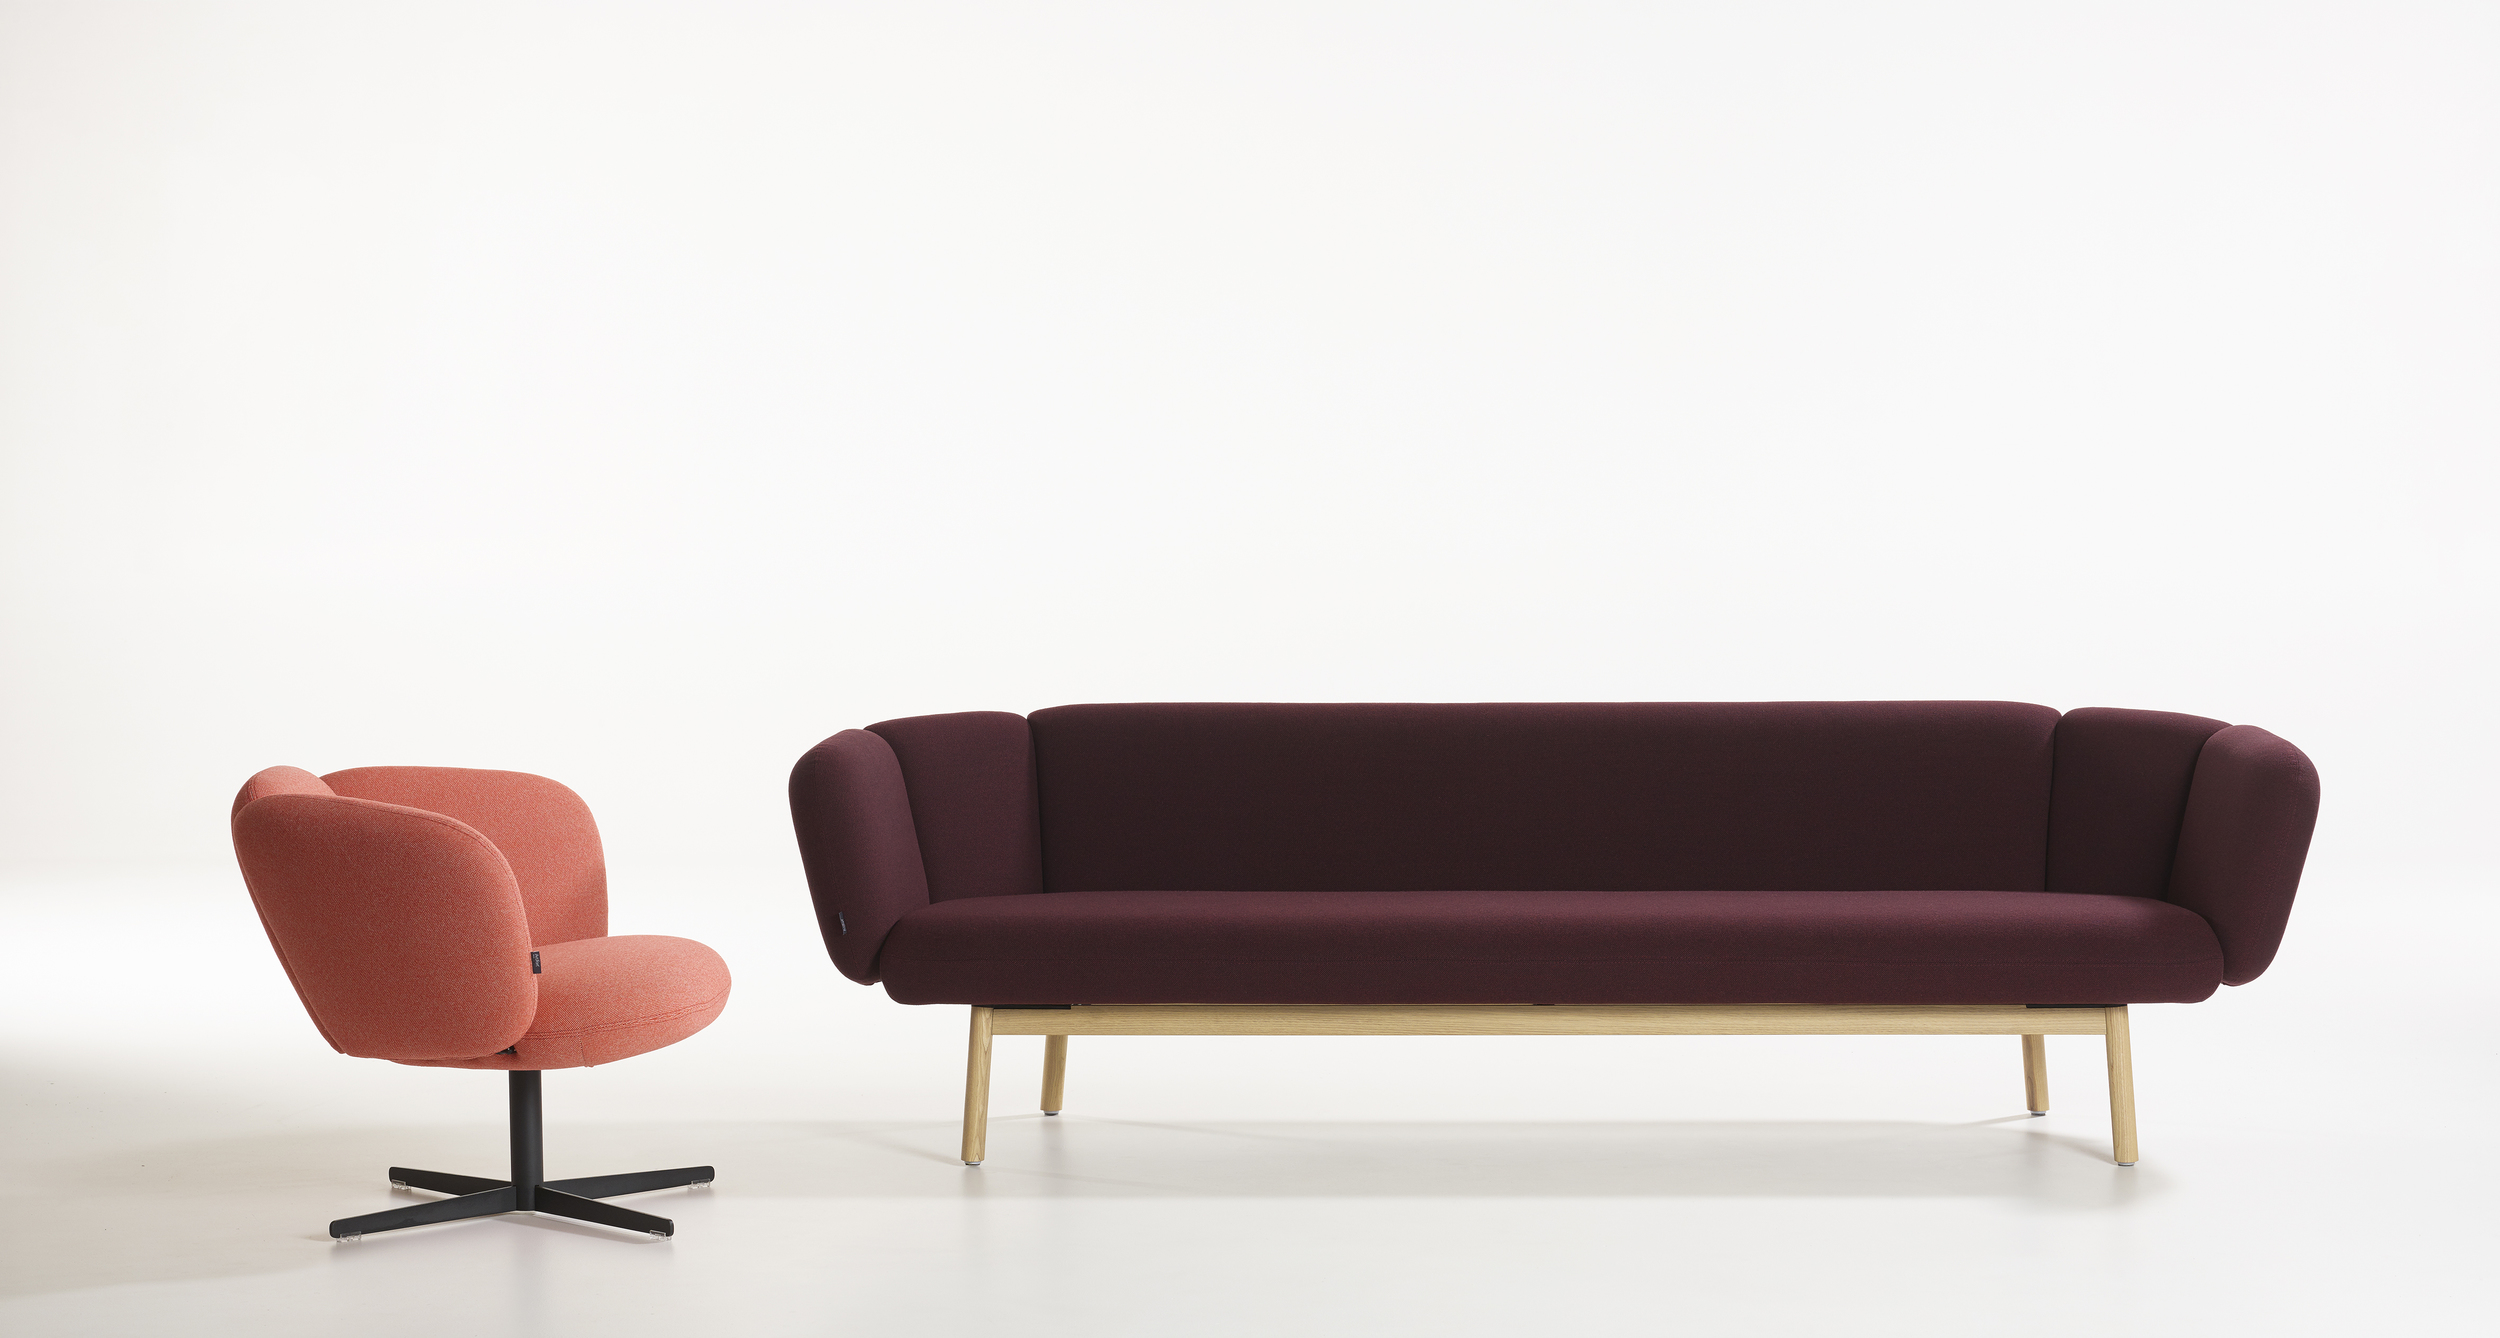 Bras sofa and Bras Lounge chair from Artifort